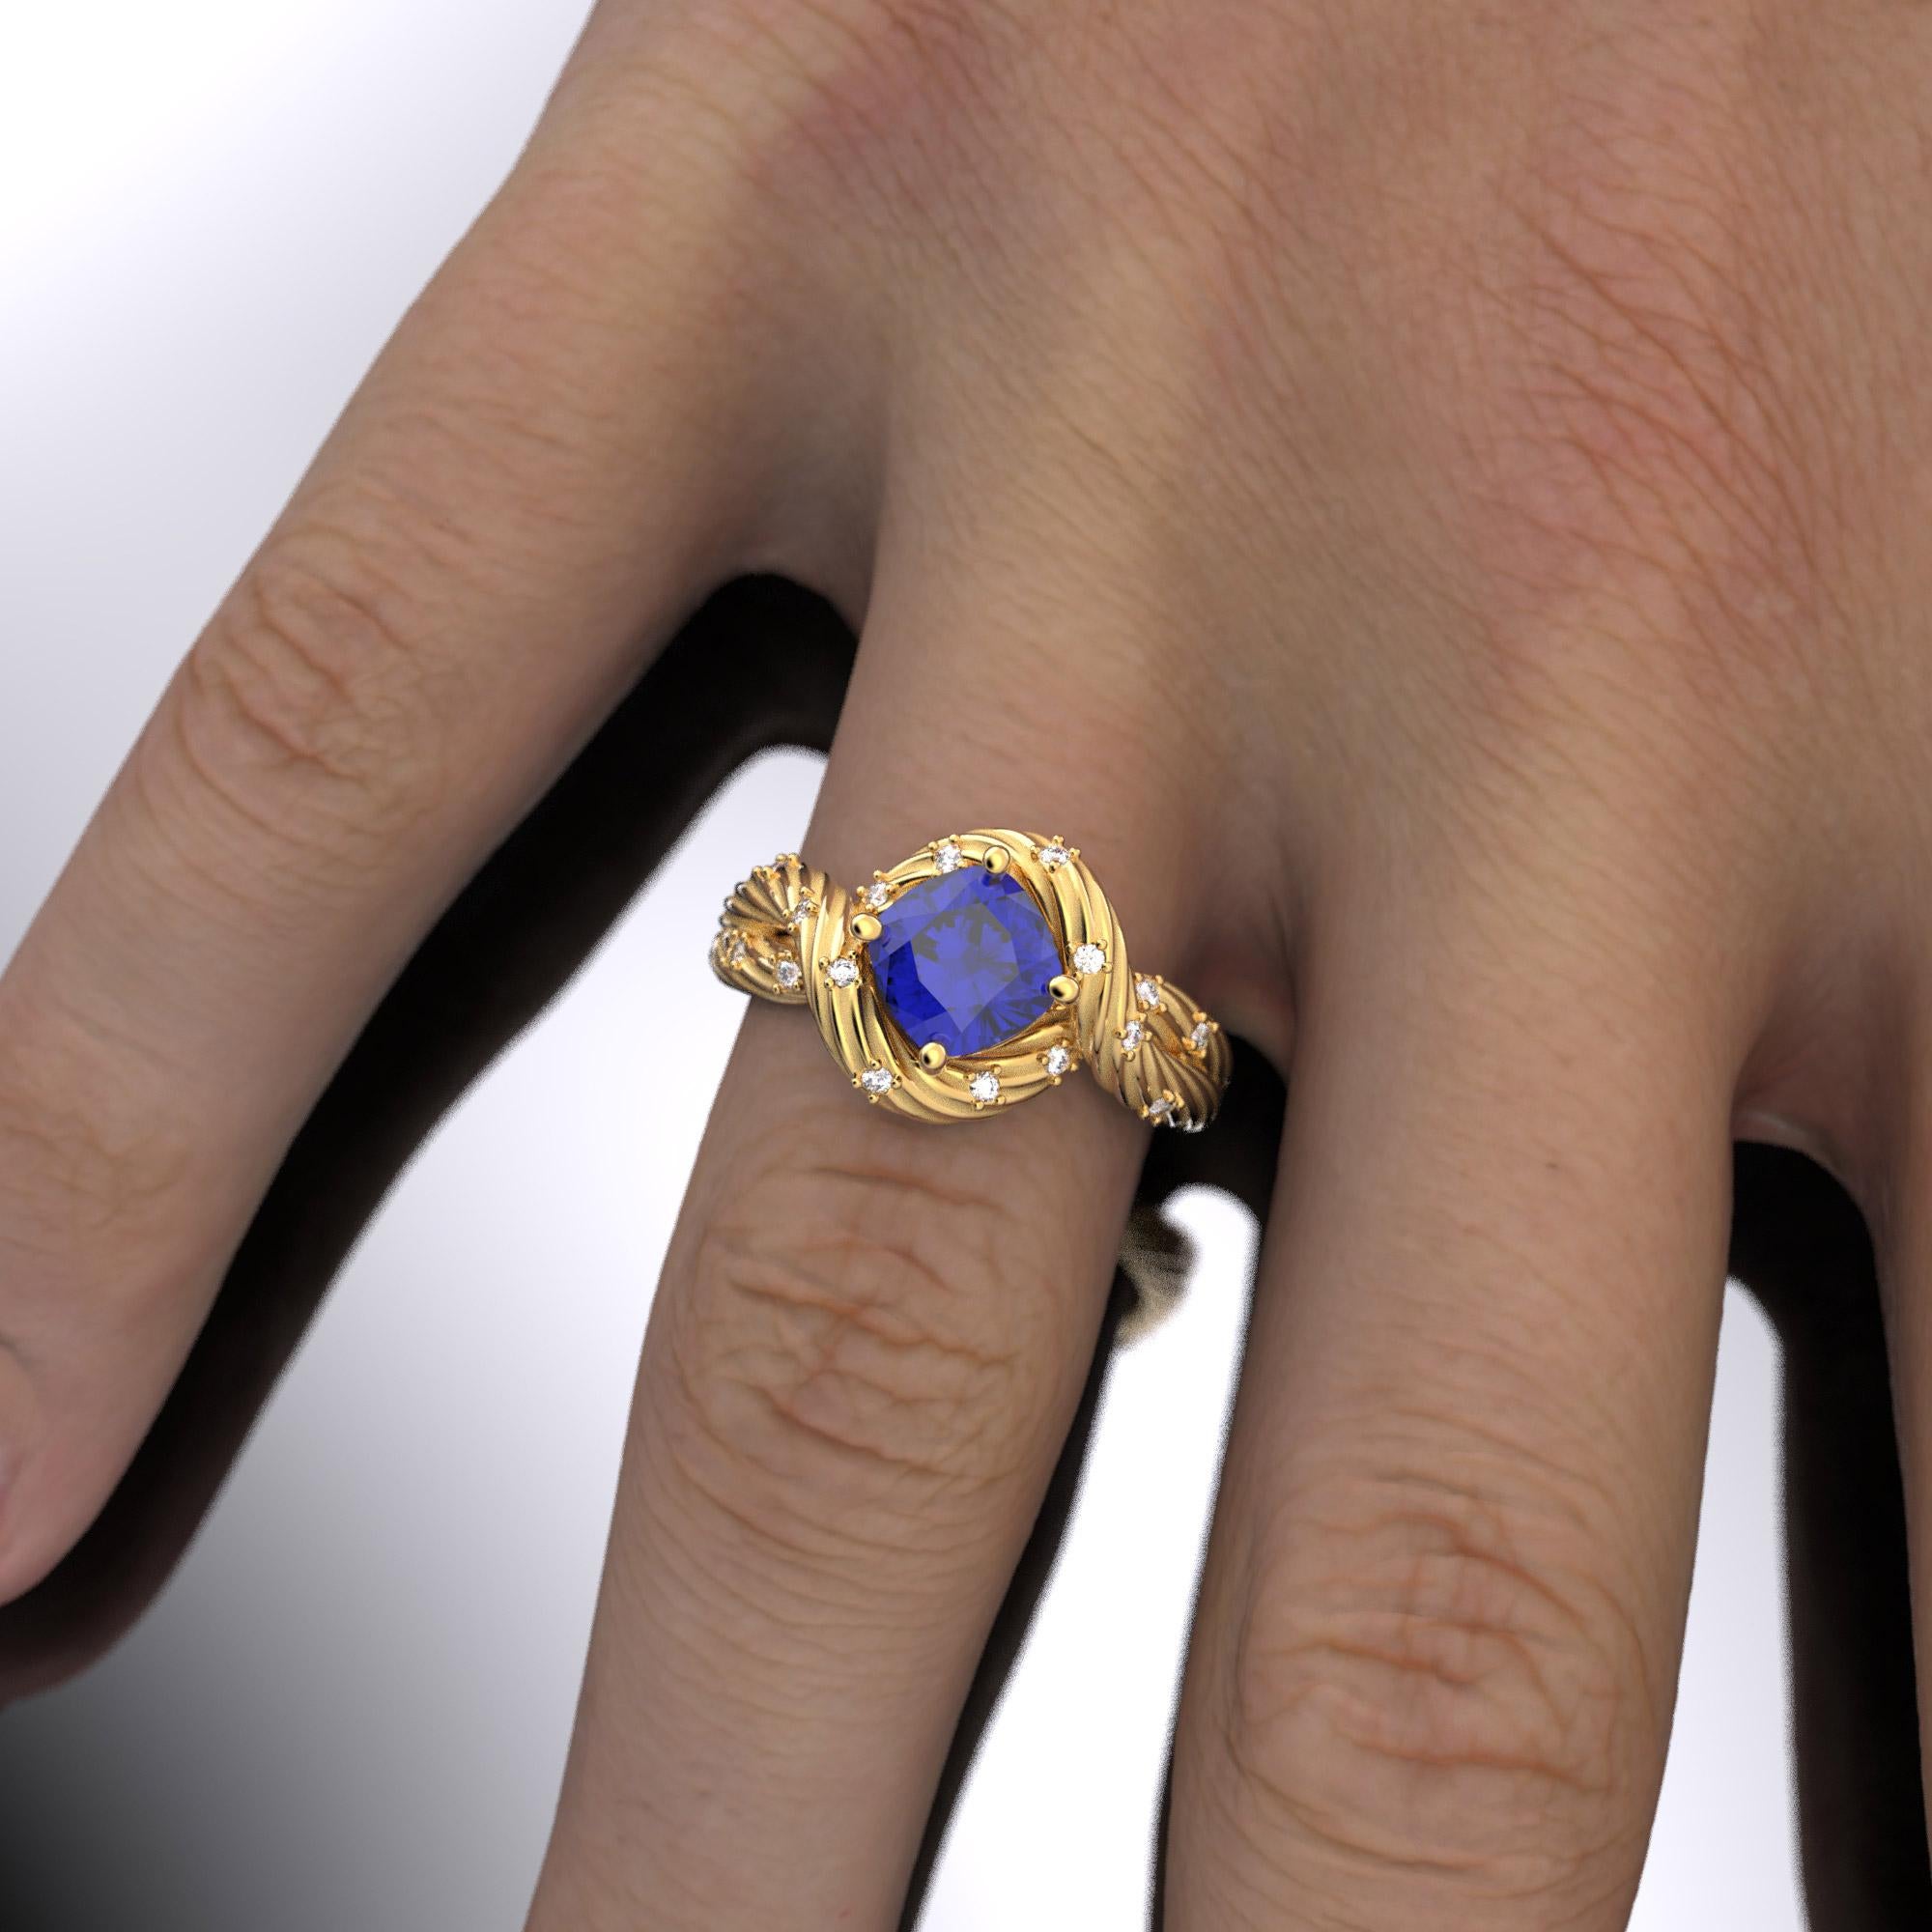 For Sale:  Tanzanite and Diamonds Ring 14k Solid Gold, Italian Fine Jewelry, made to order. 4